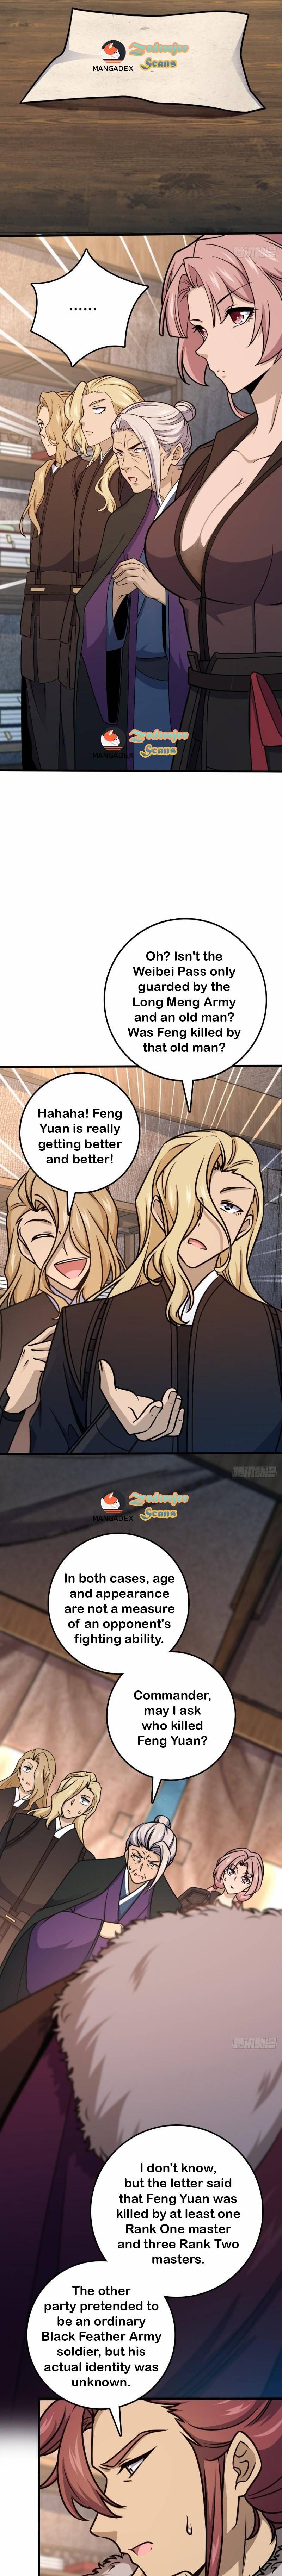 Spare Me, Great Lord! Chapter 570 page 8 - MangaWeebs.in